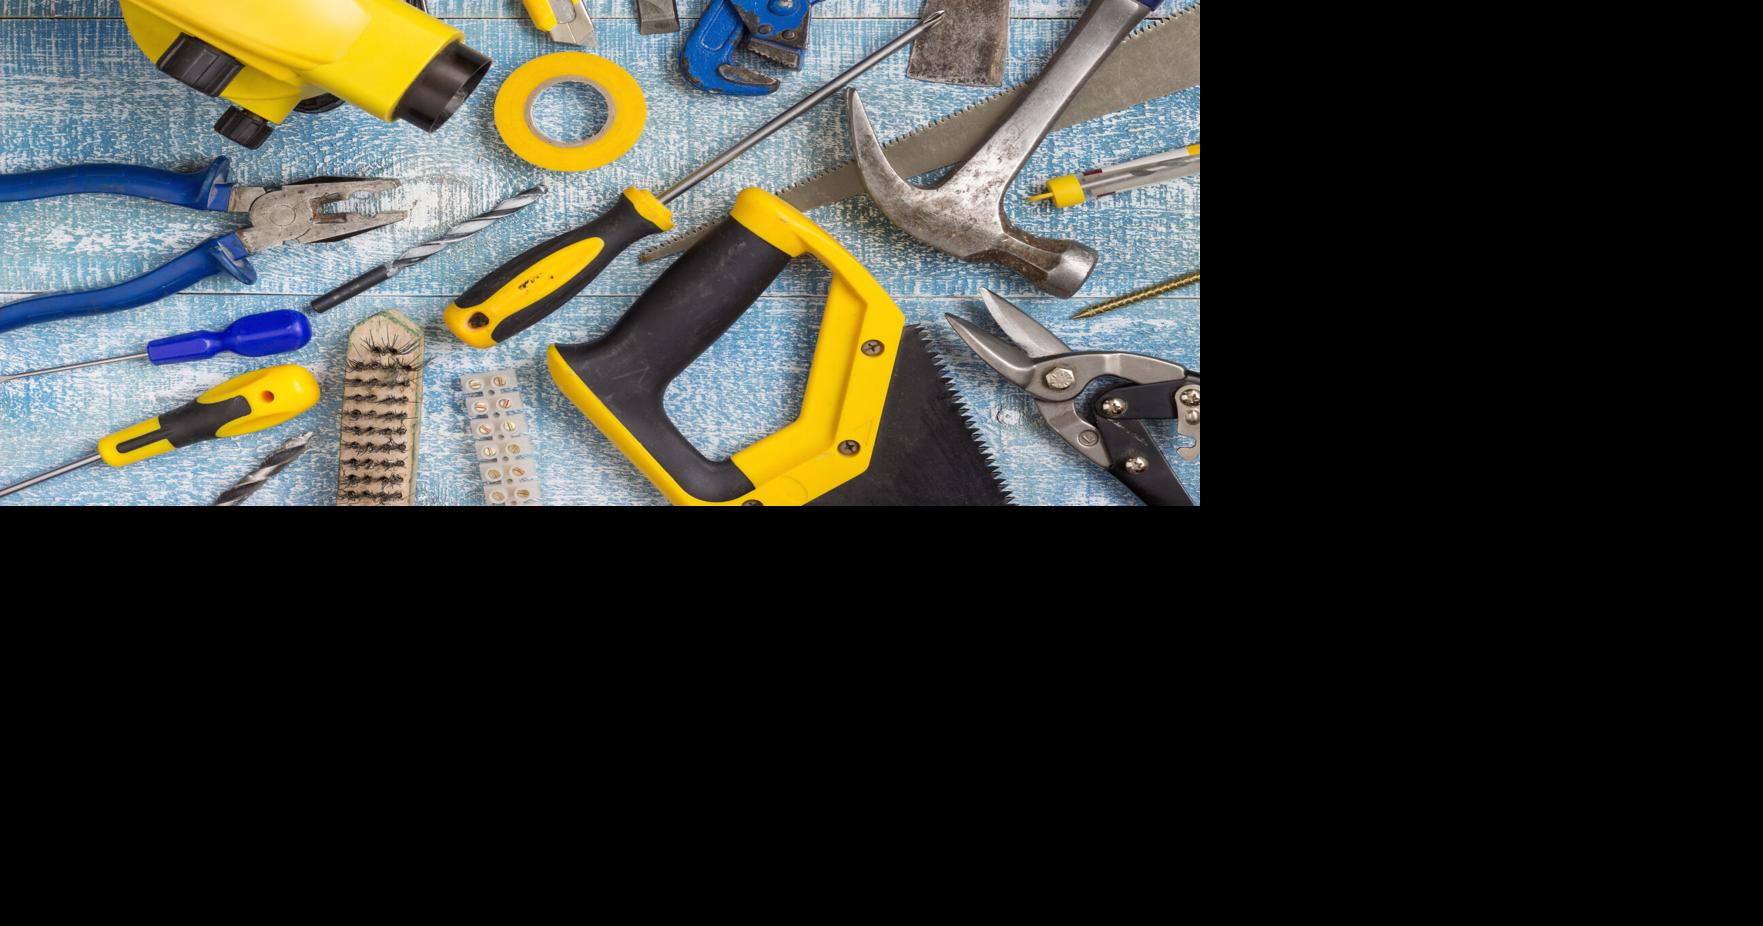 Put down the drill and no one gets hurt! Know when to turn over home improvement projects to the pros | Entertainment/Life